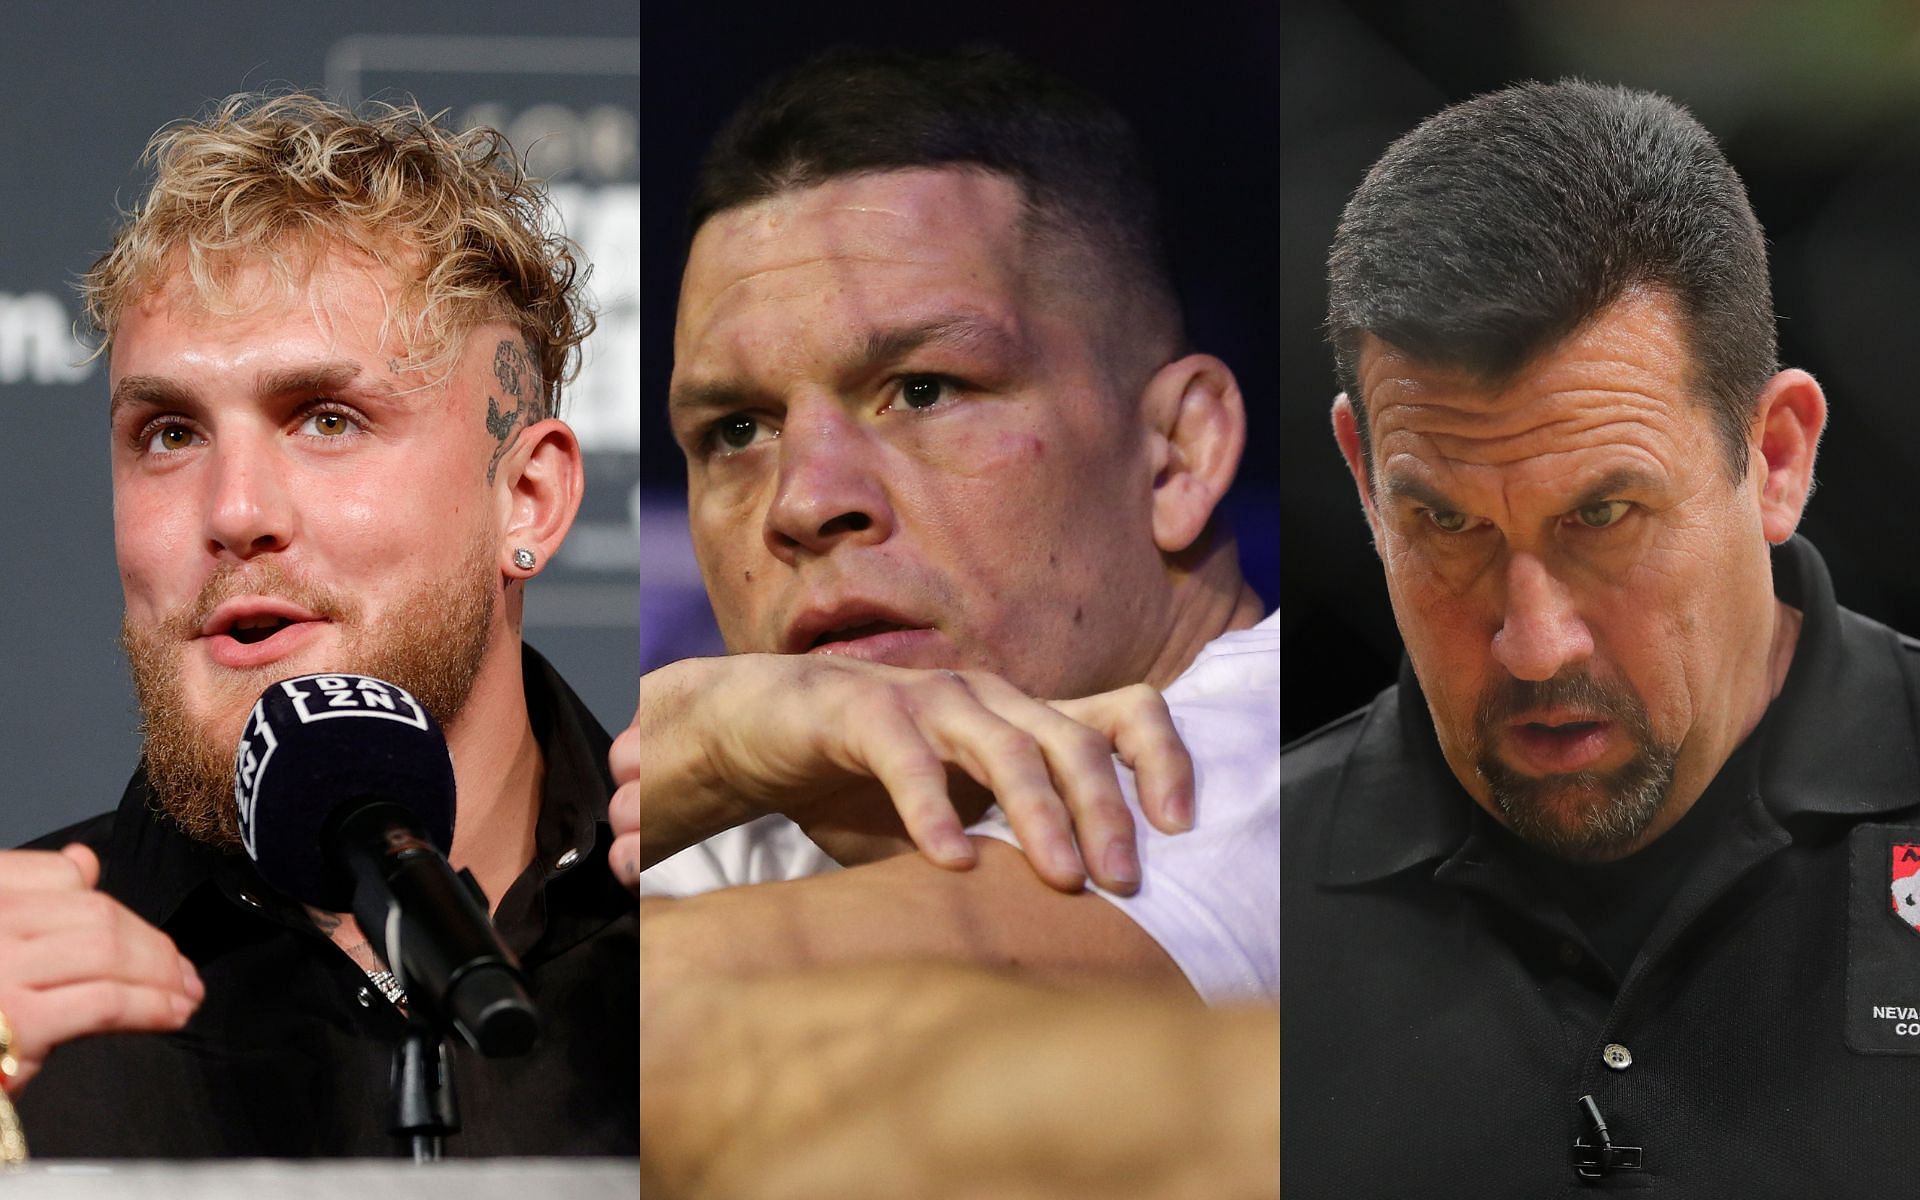 Jake Paul (Left), Nate Diaz (Middle), and John McCarthy (Right)